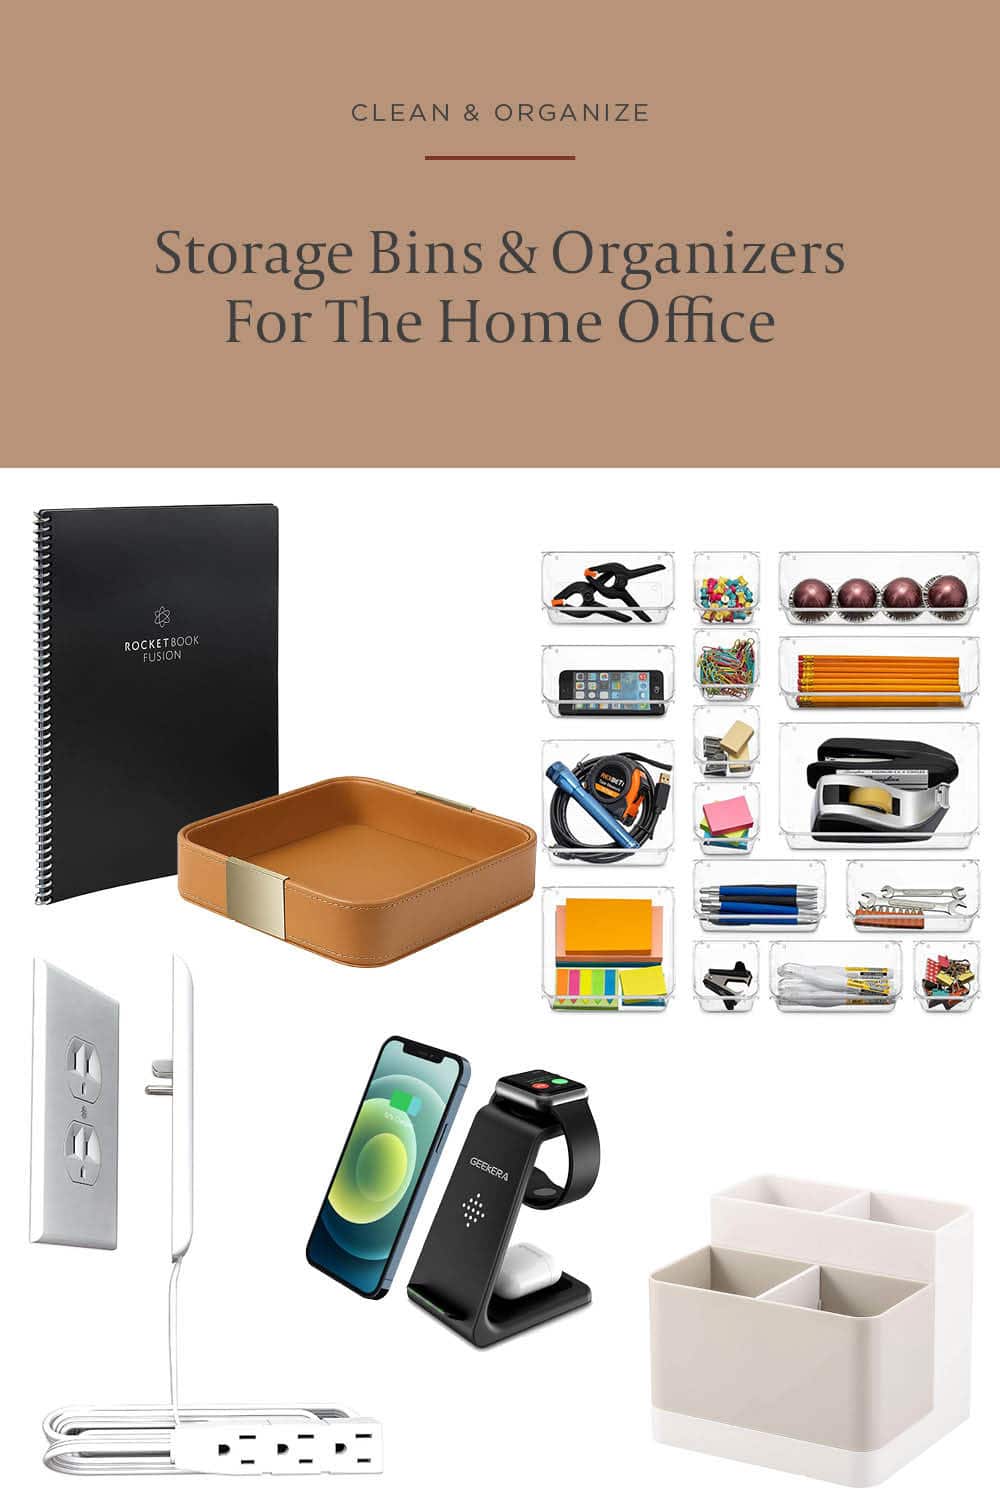 https://houseofhipsters.com/wp-content/uploads/2021/09/best-home-organization-products-home-office.jpg